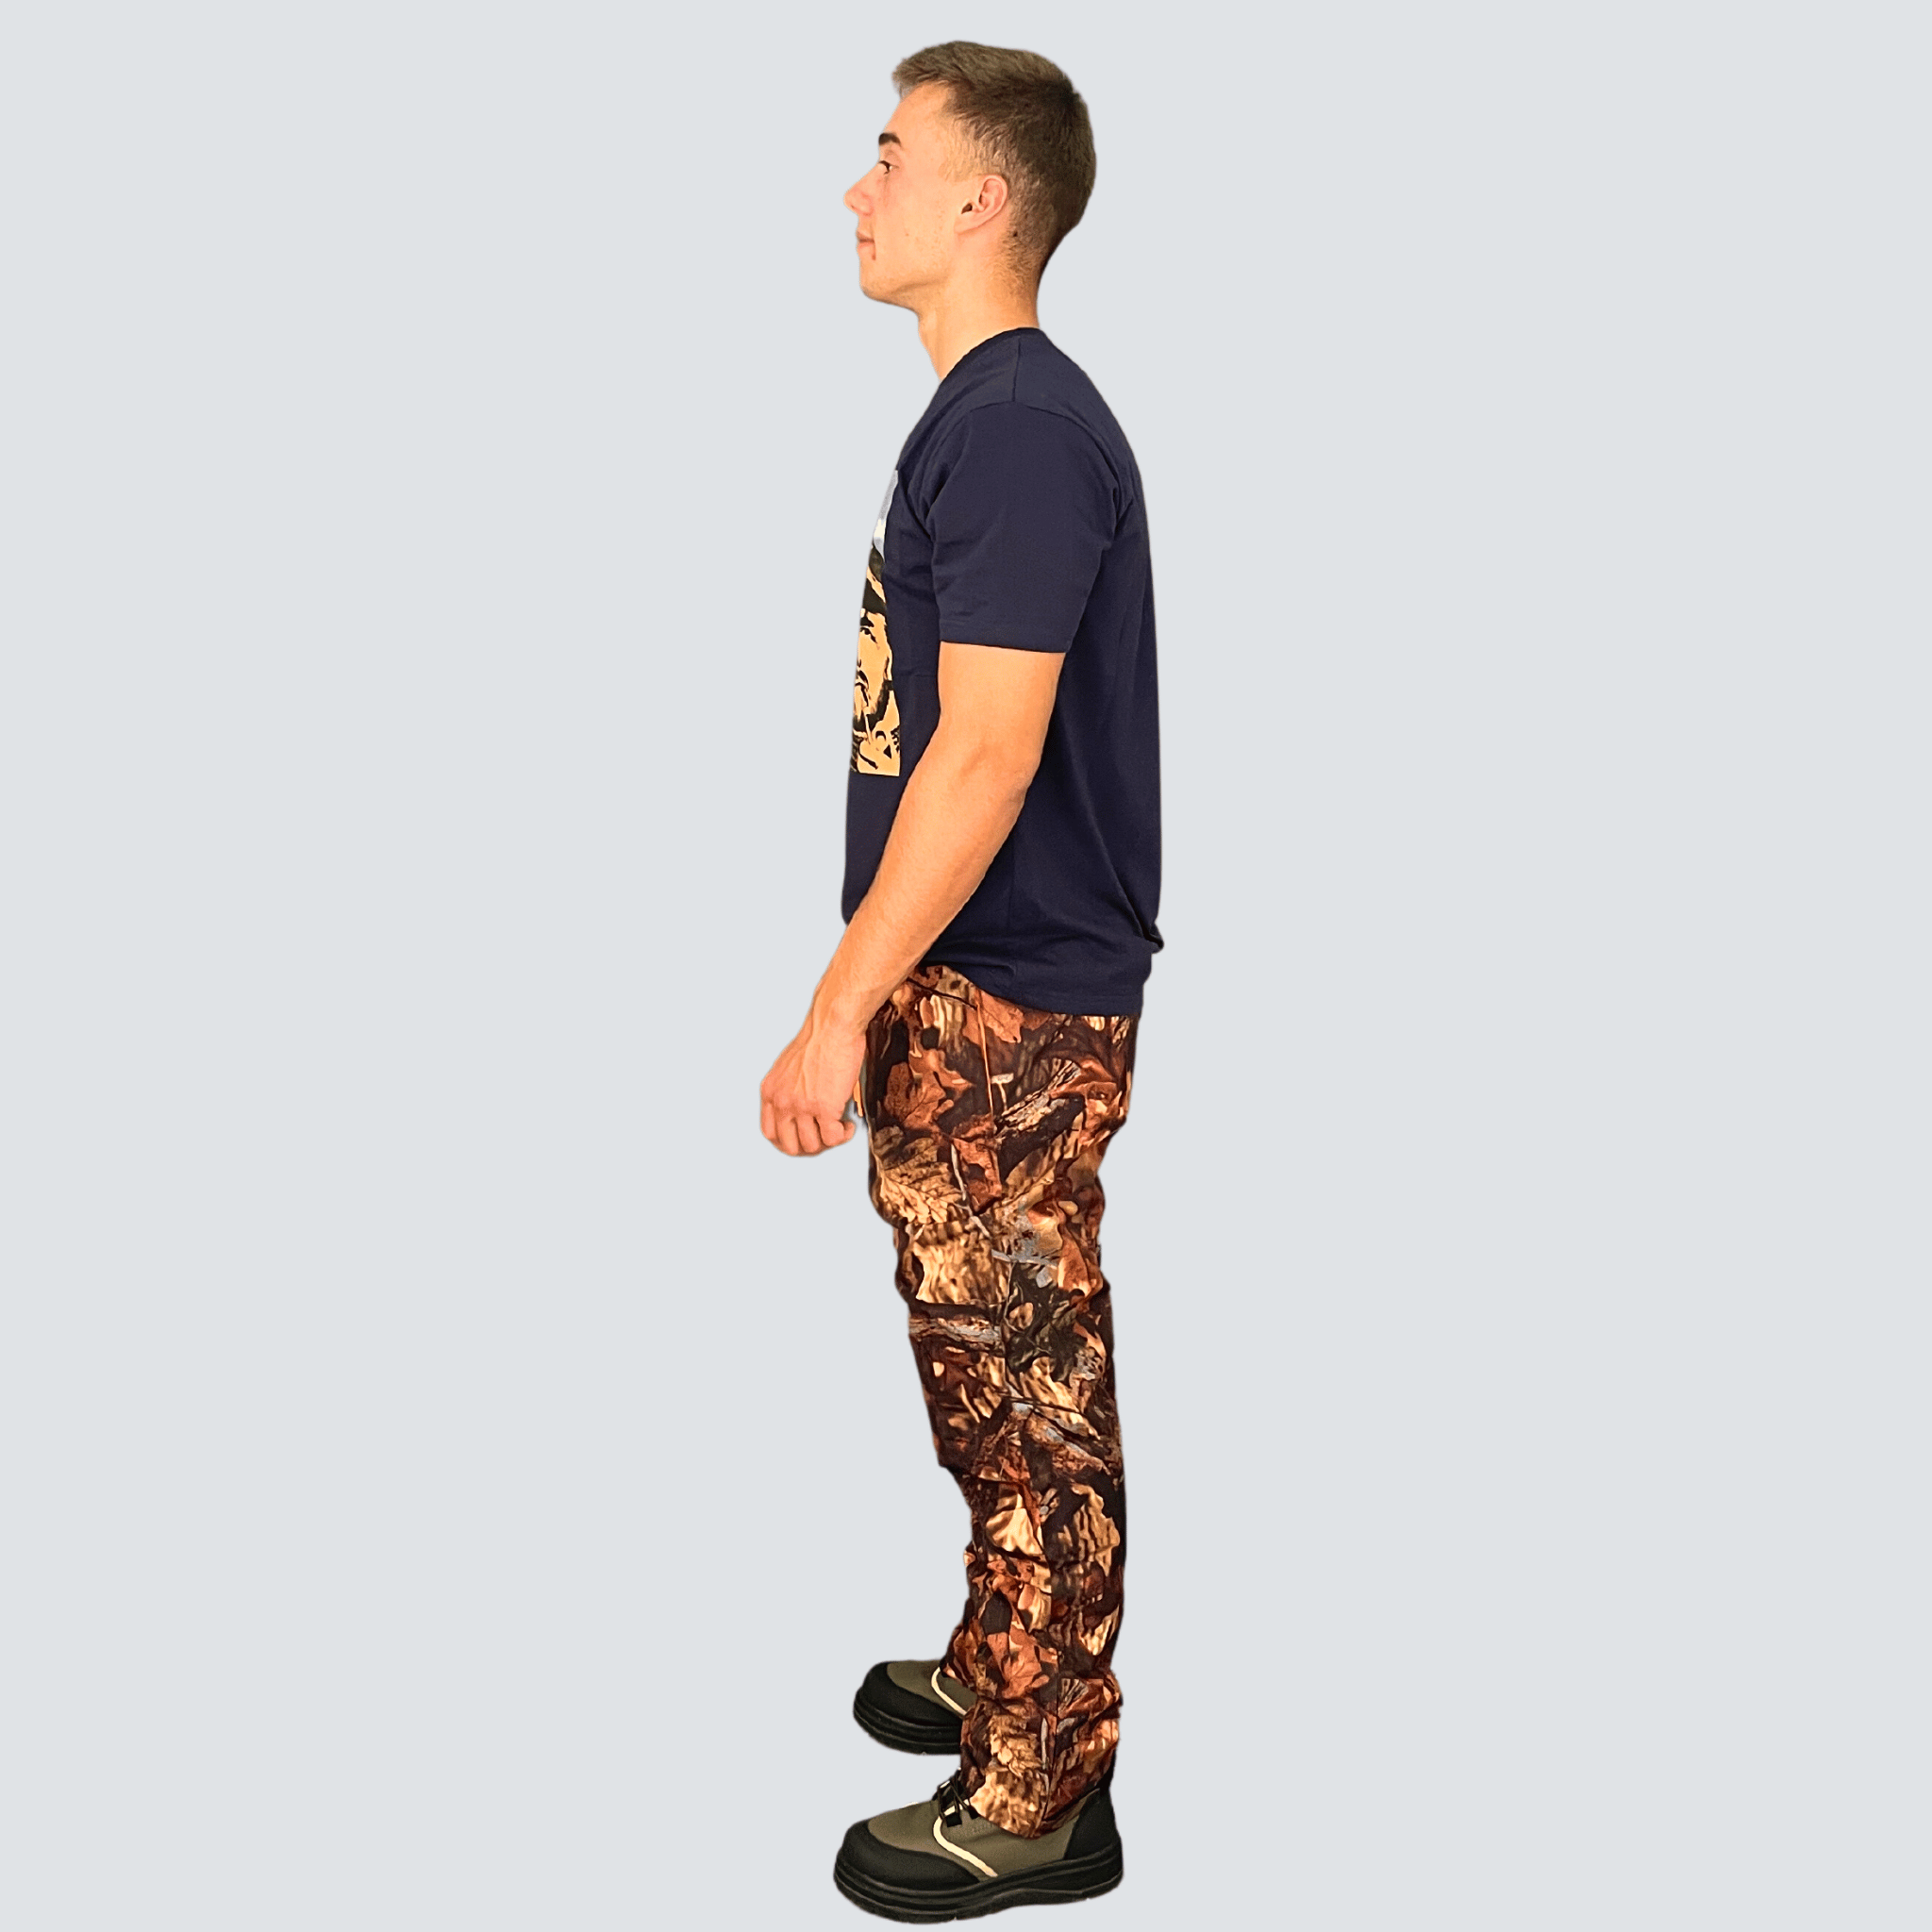 Outdoor High Performance Trousers Unisex